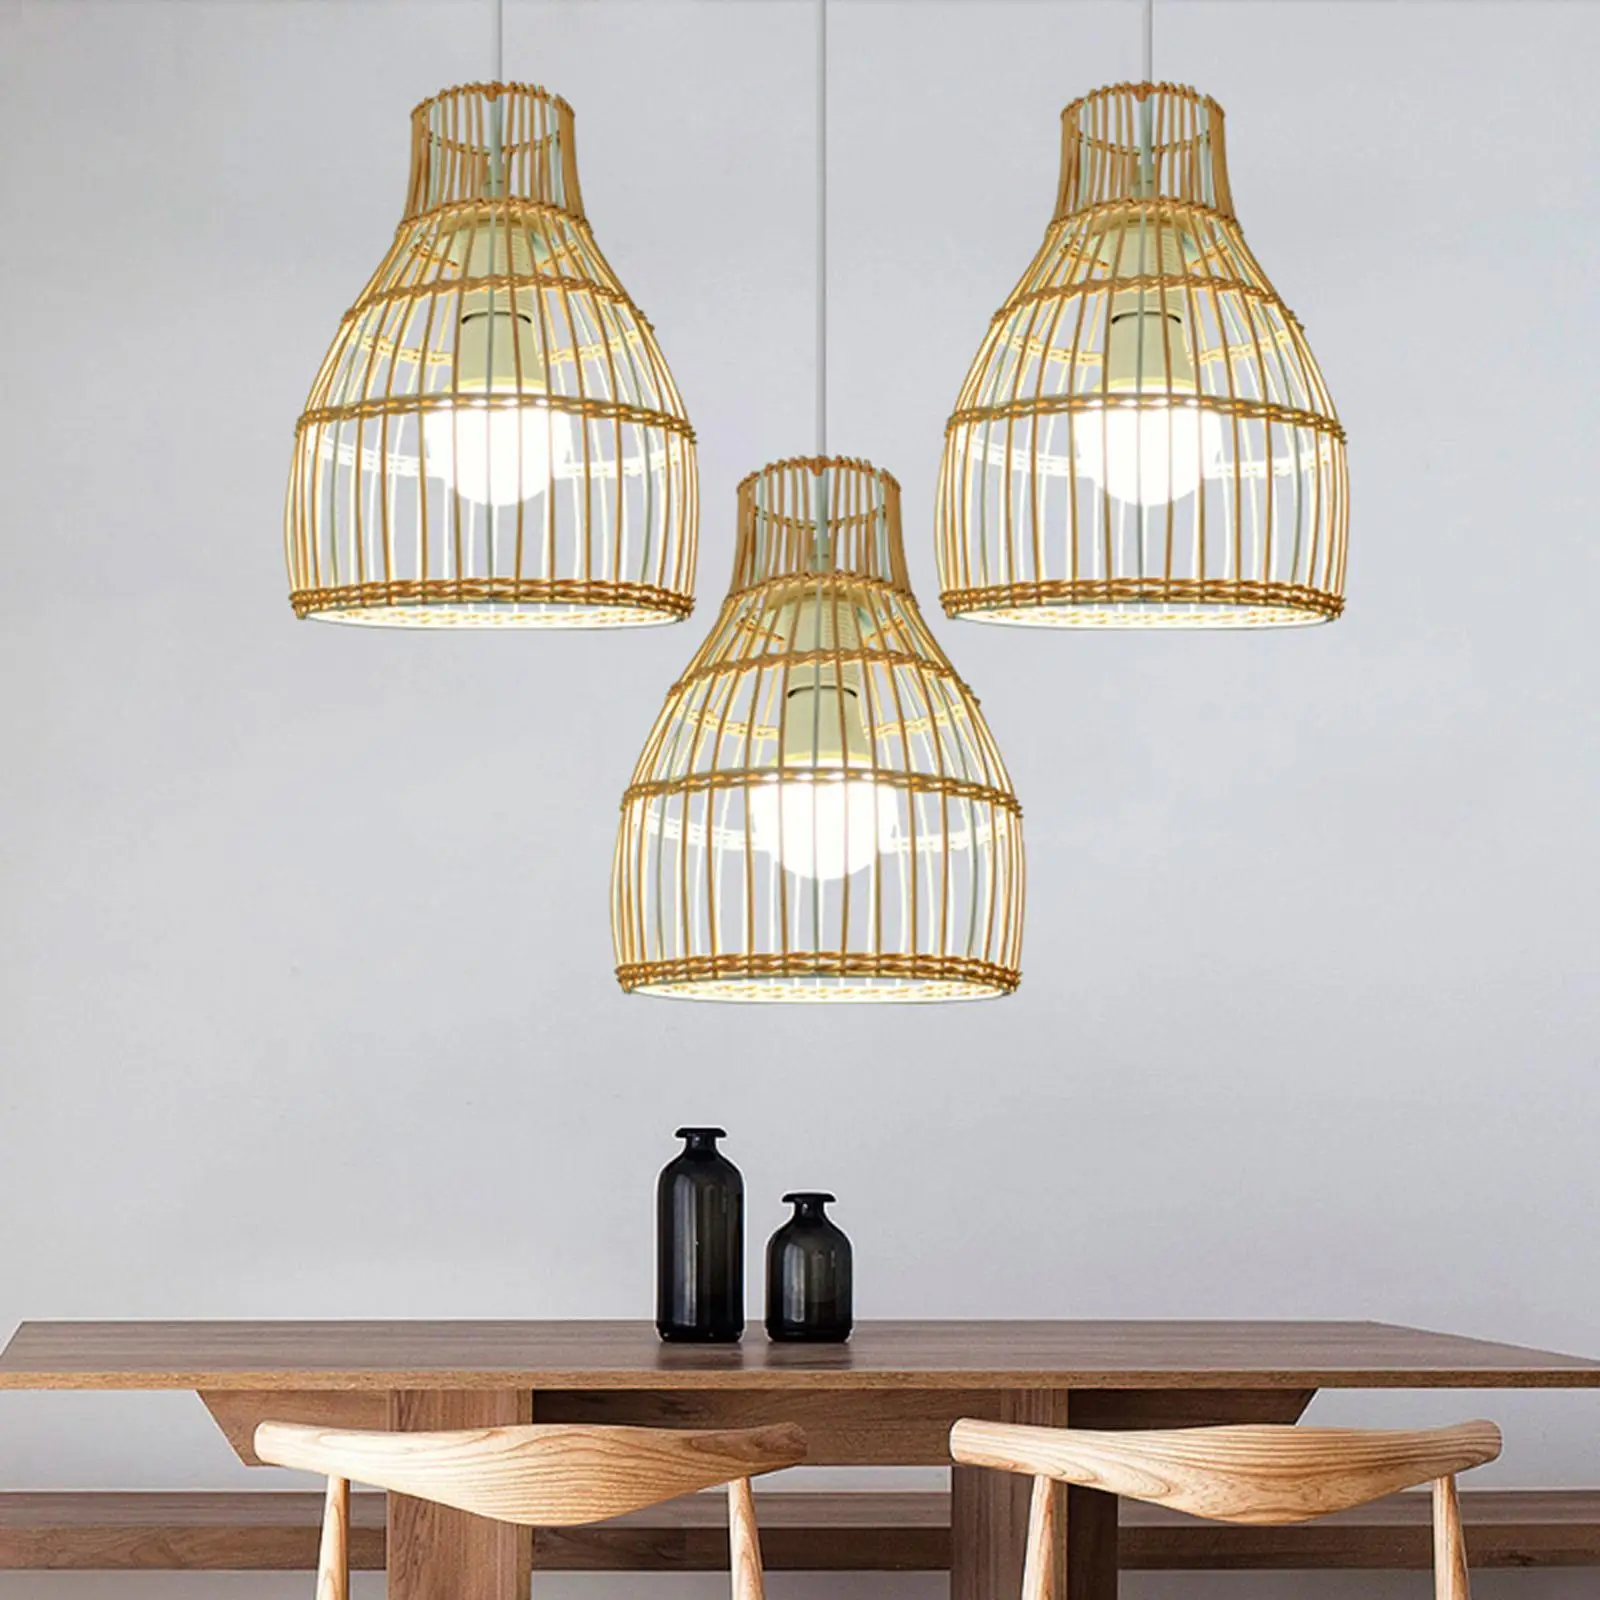 Rural Style Rattan Chandelier Lampshade Lamp for Dining Room Lampshade Decor  Living Room Table Cafe Restaurant 